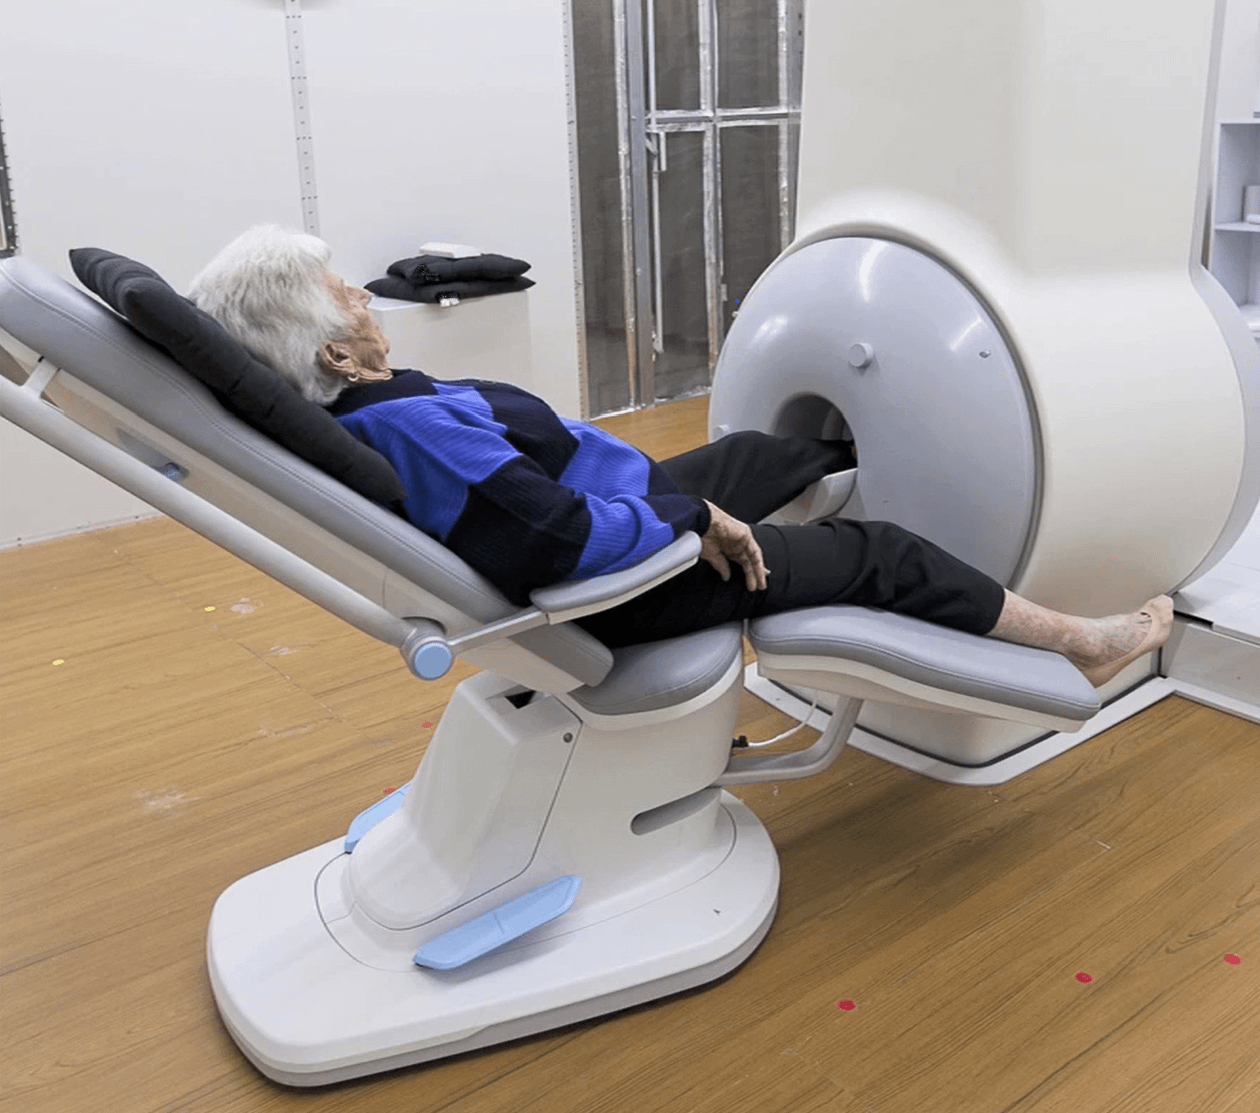 Compact MRI Systems for extremities - foot scan.